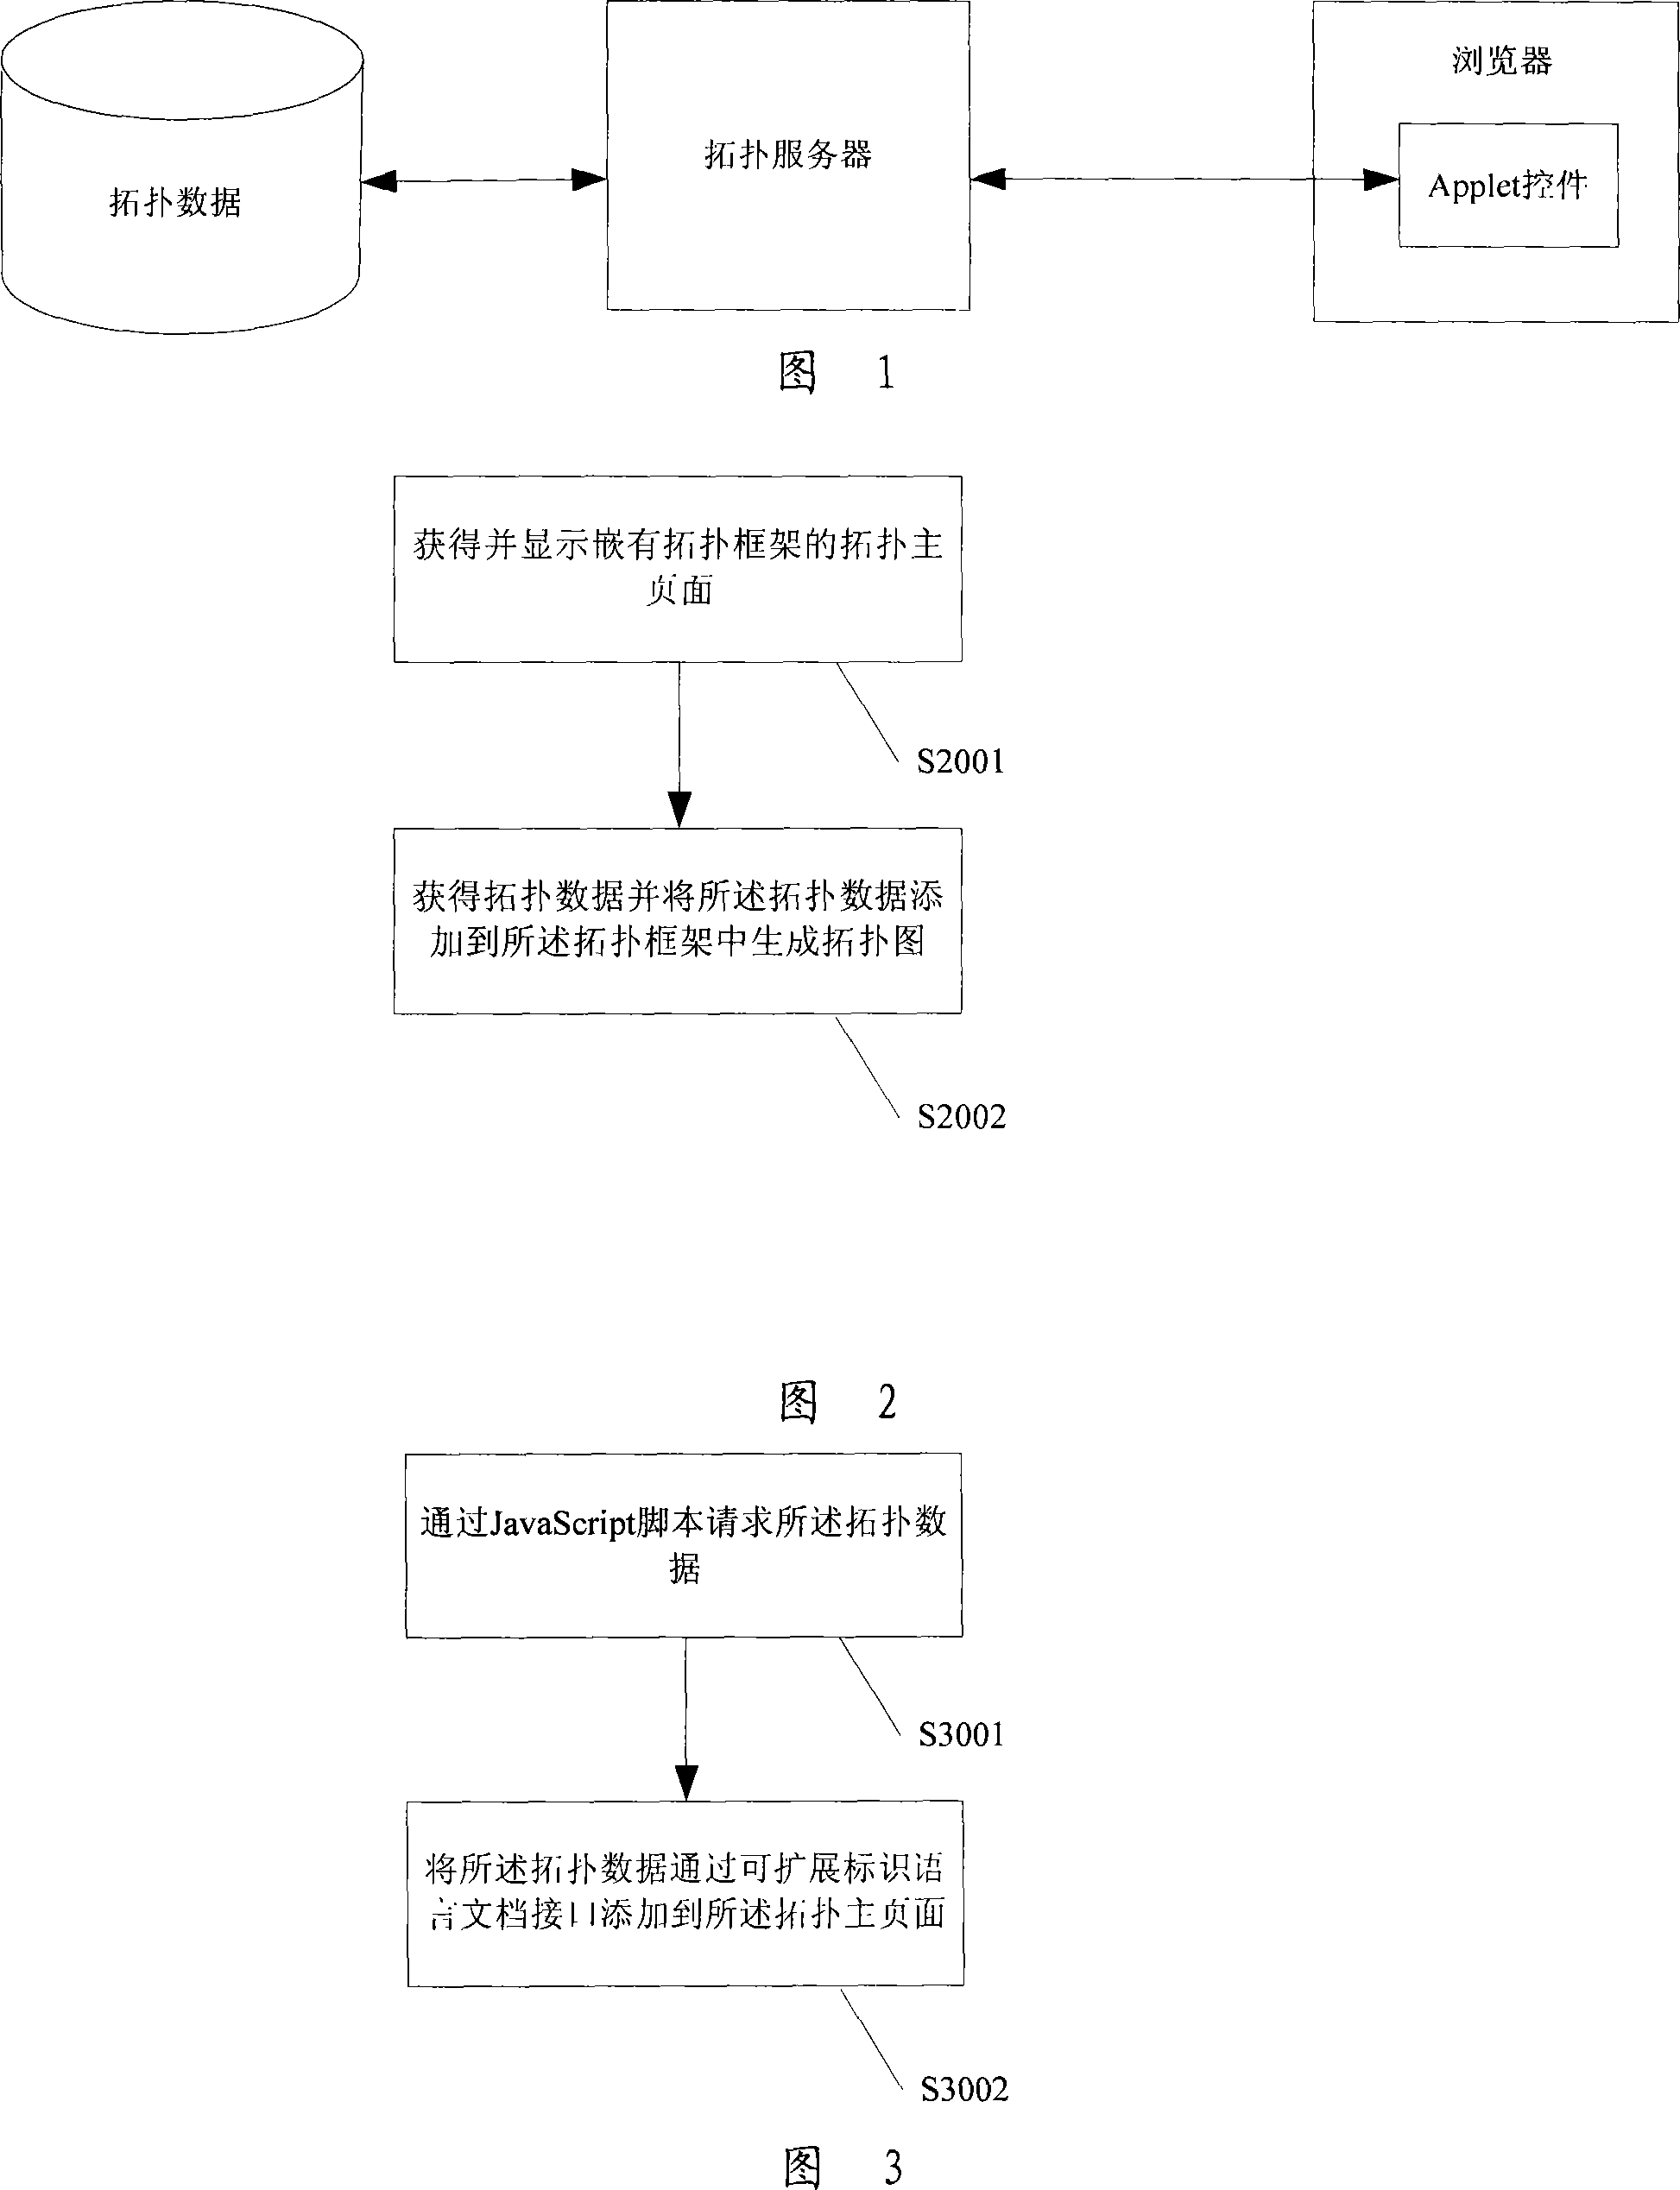 Topological diagram display process, system and device